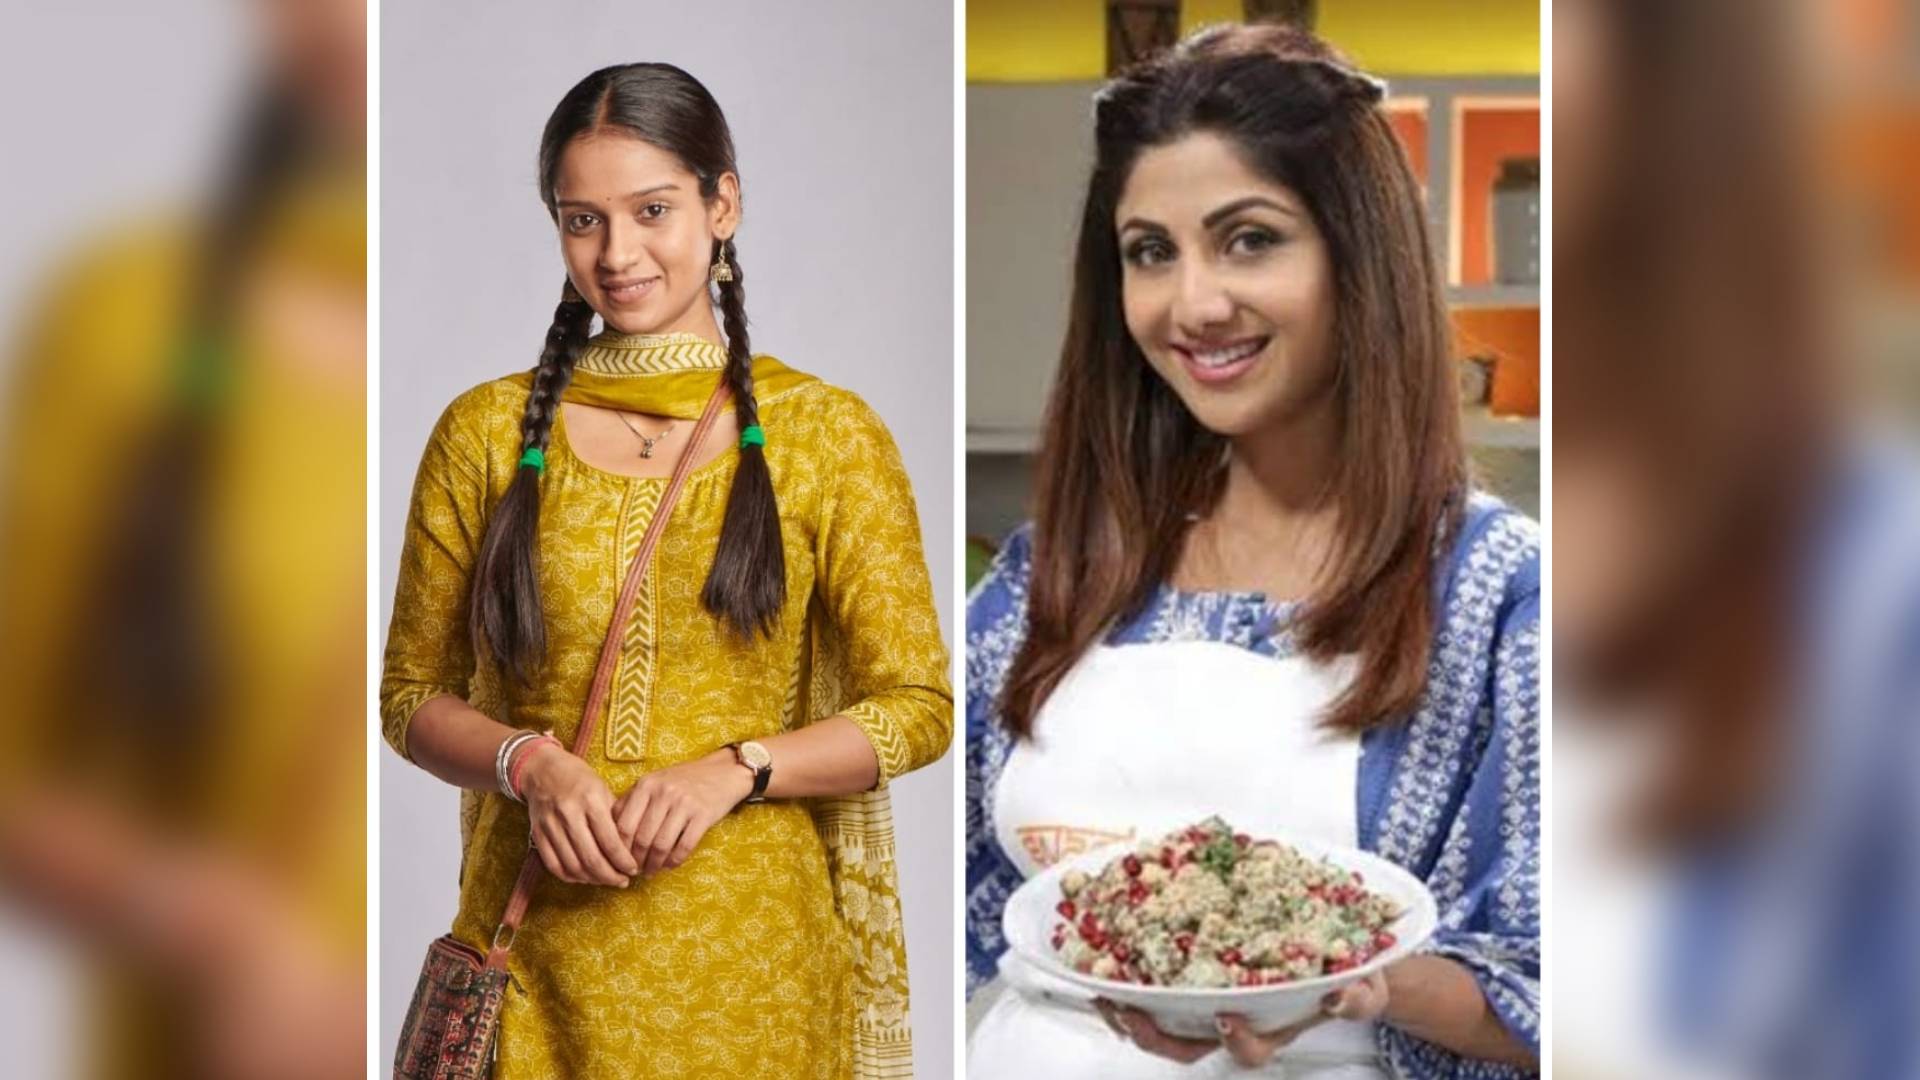 Did you know, Prerna Singh, aka Sajeeri, Imbibes A Similar Cooking Interest Like Bollywood Actress Shilpa Shetty, Which She Inculcated For Her Role In The Star Plus Show Meetha Khatta Pyaar Hamara!